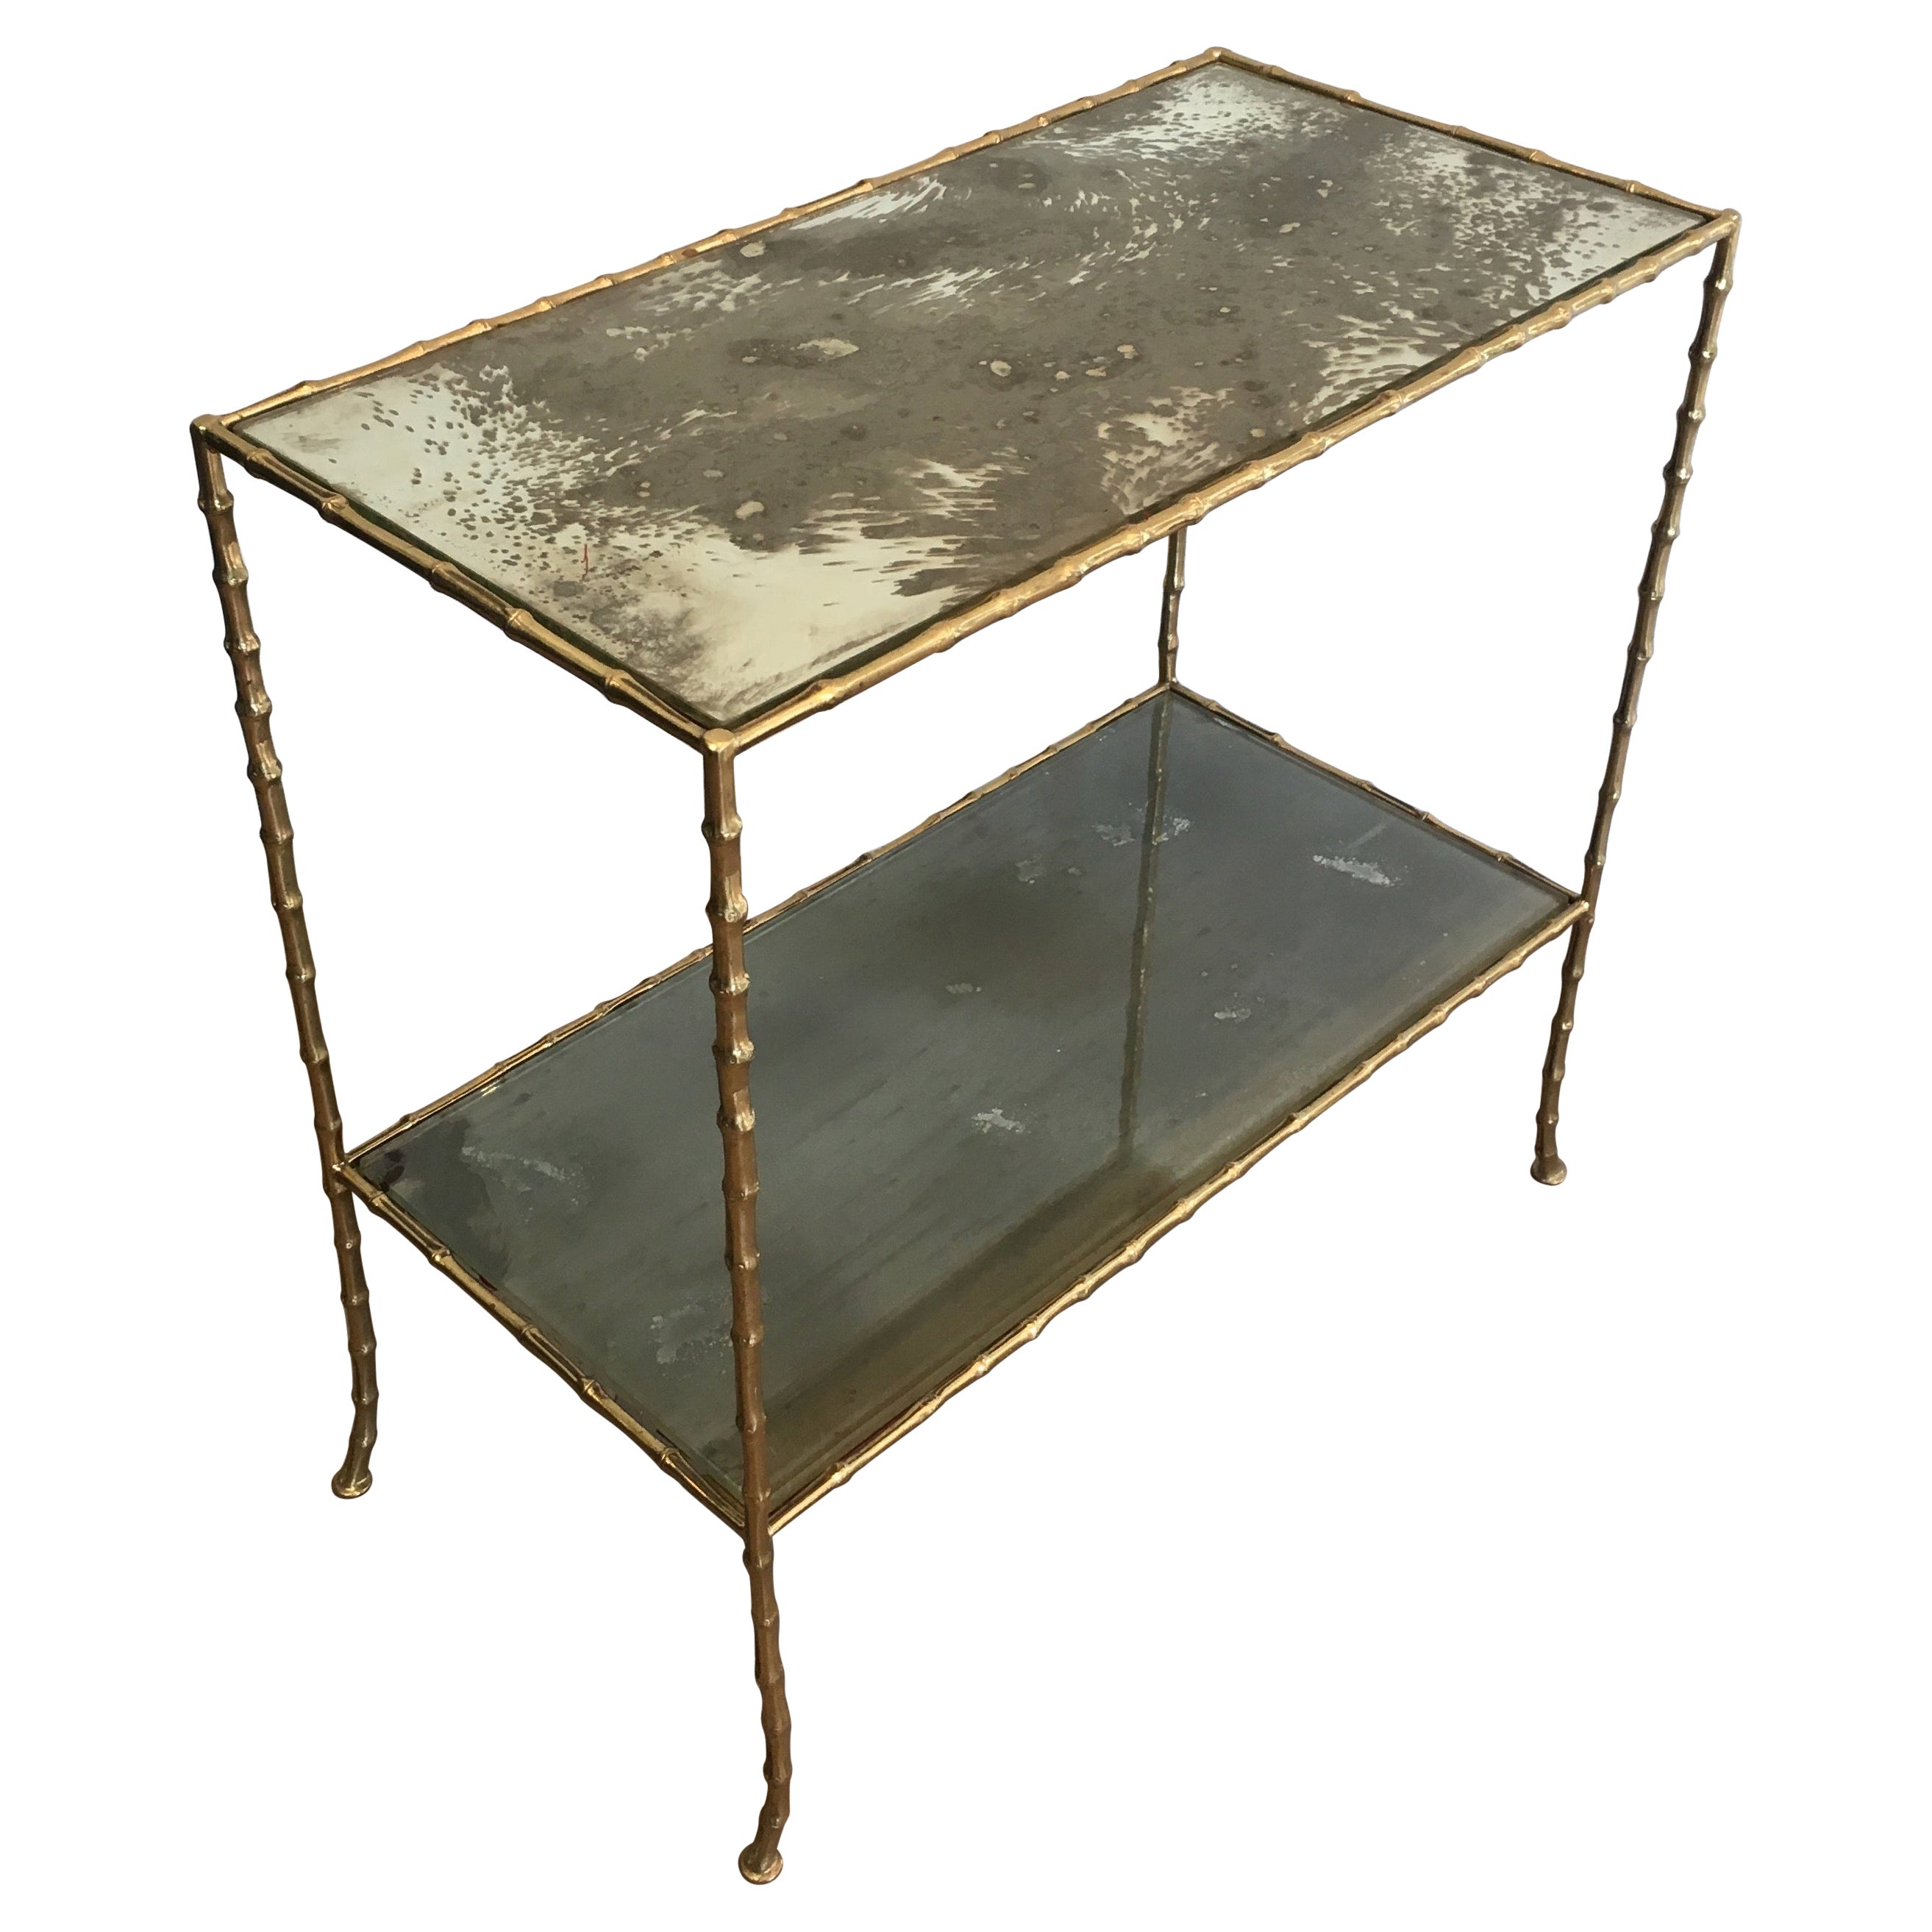 Maison Baguès Faux-Bamboo Bronze Side Table with Eglomized Glass Shelves